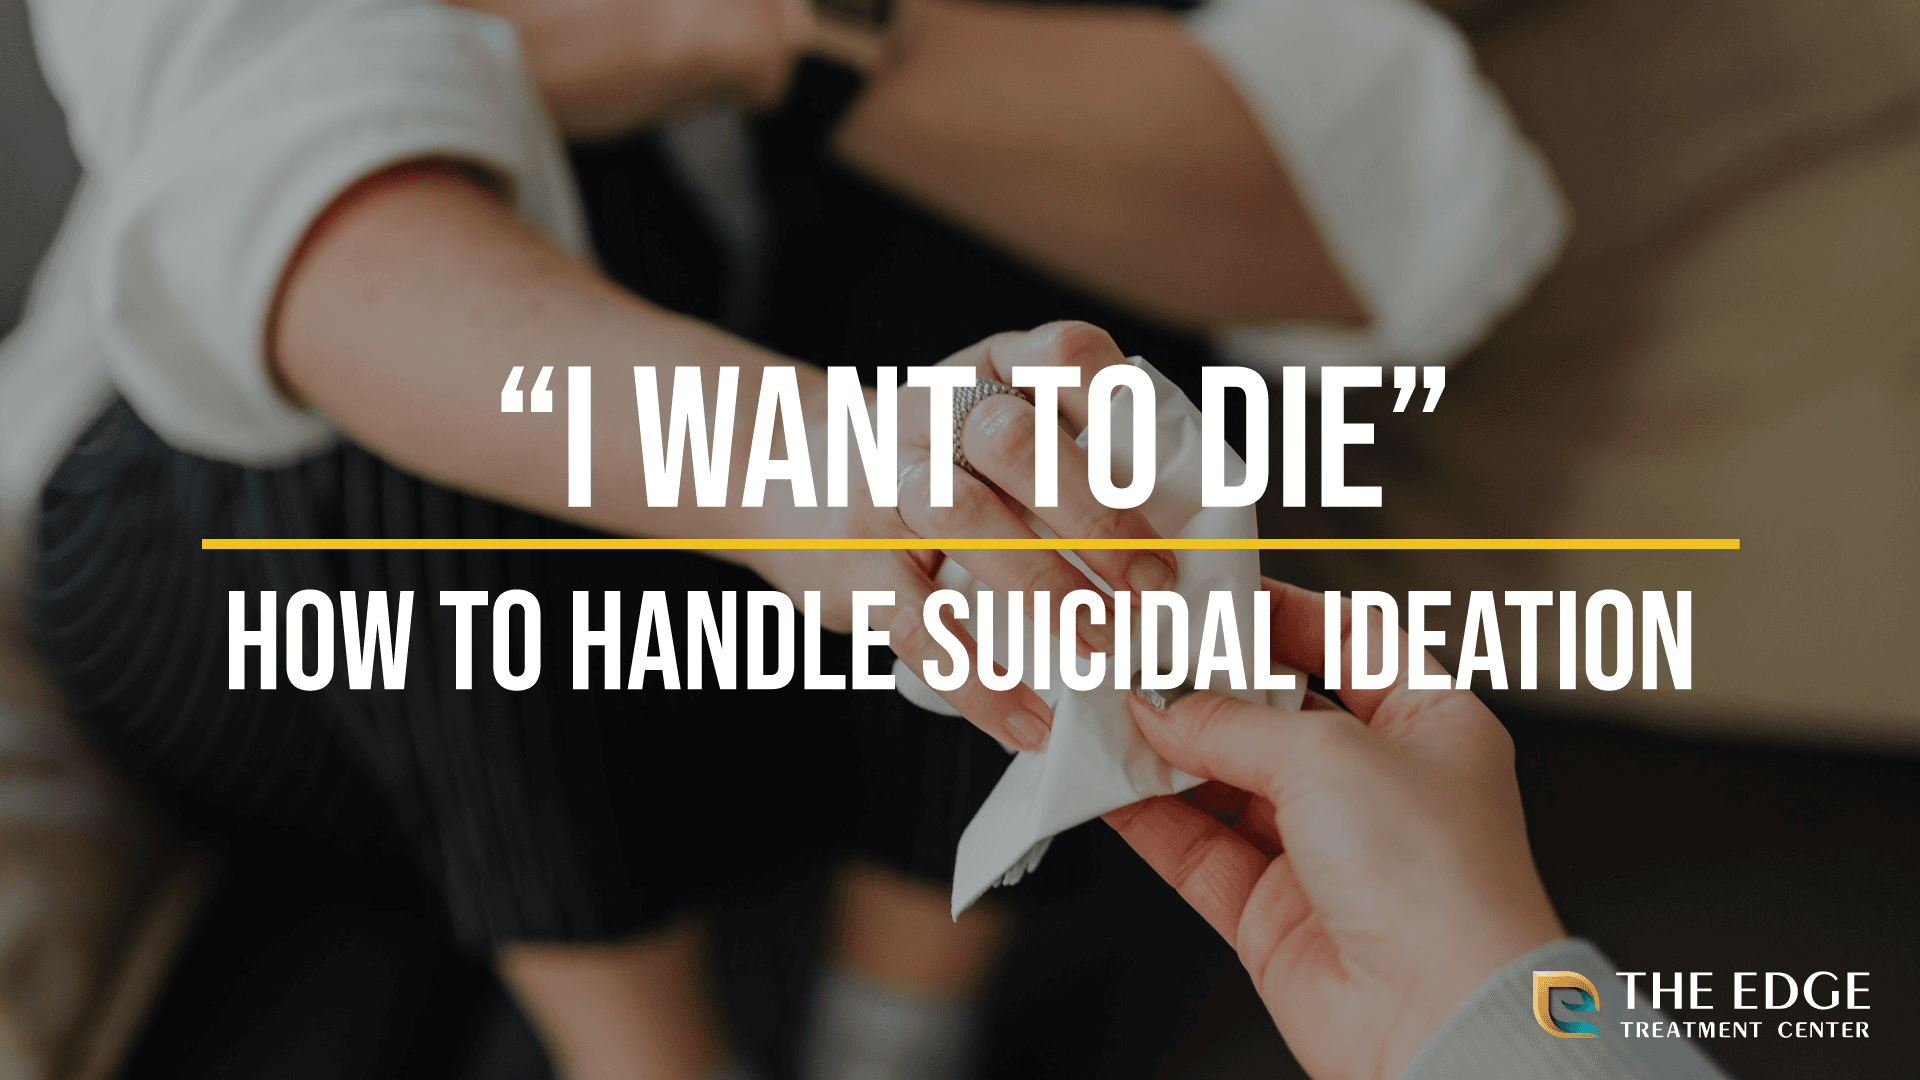 "I Want to Die": What is Suicidal Ideation?